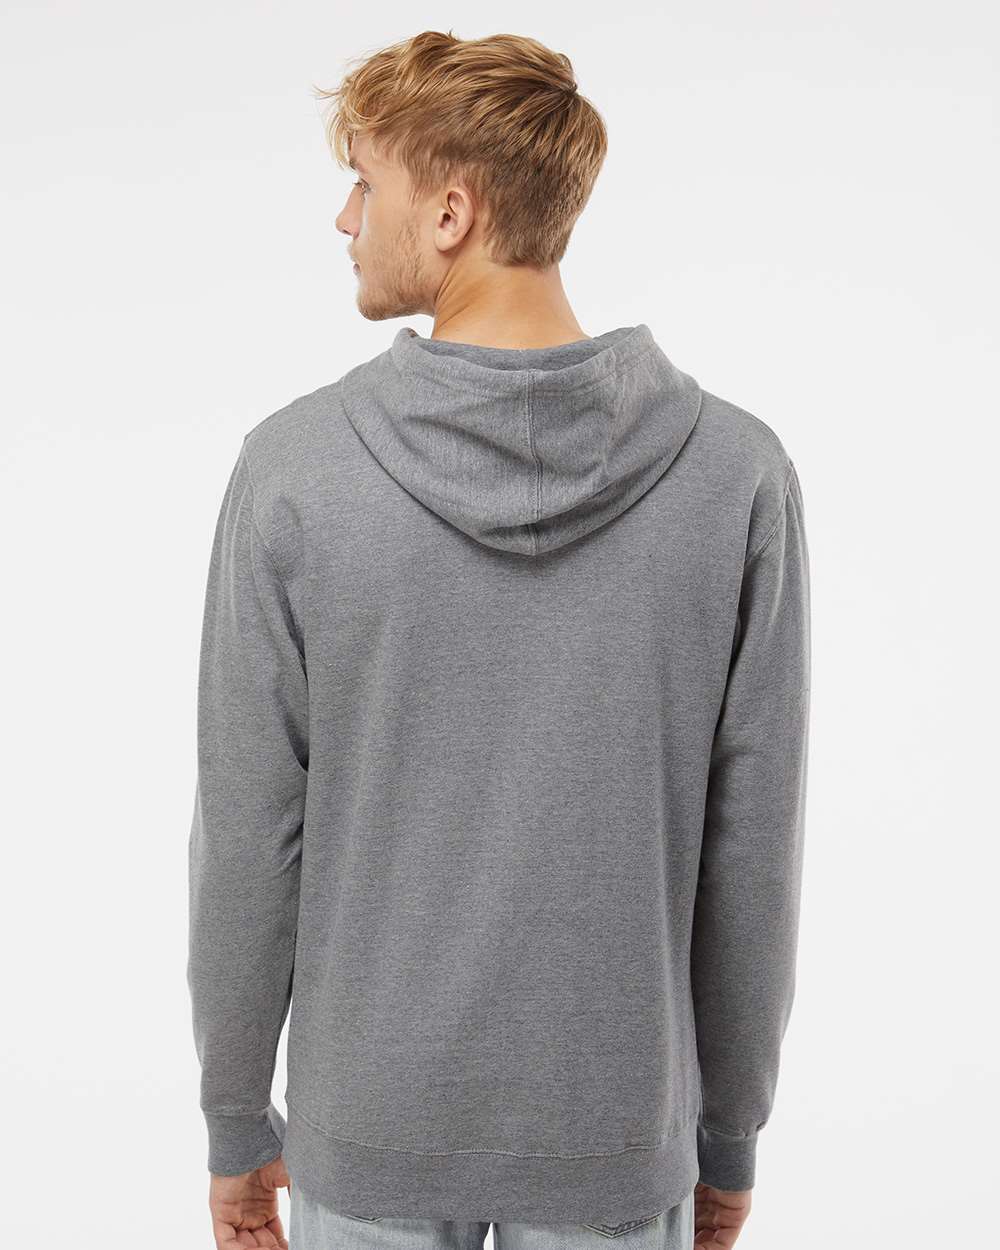 Independent Trading Co. Midweight Hooded Sweatshirt SS4500 #colormdl_Gunmetal Heather